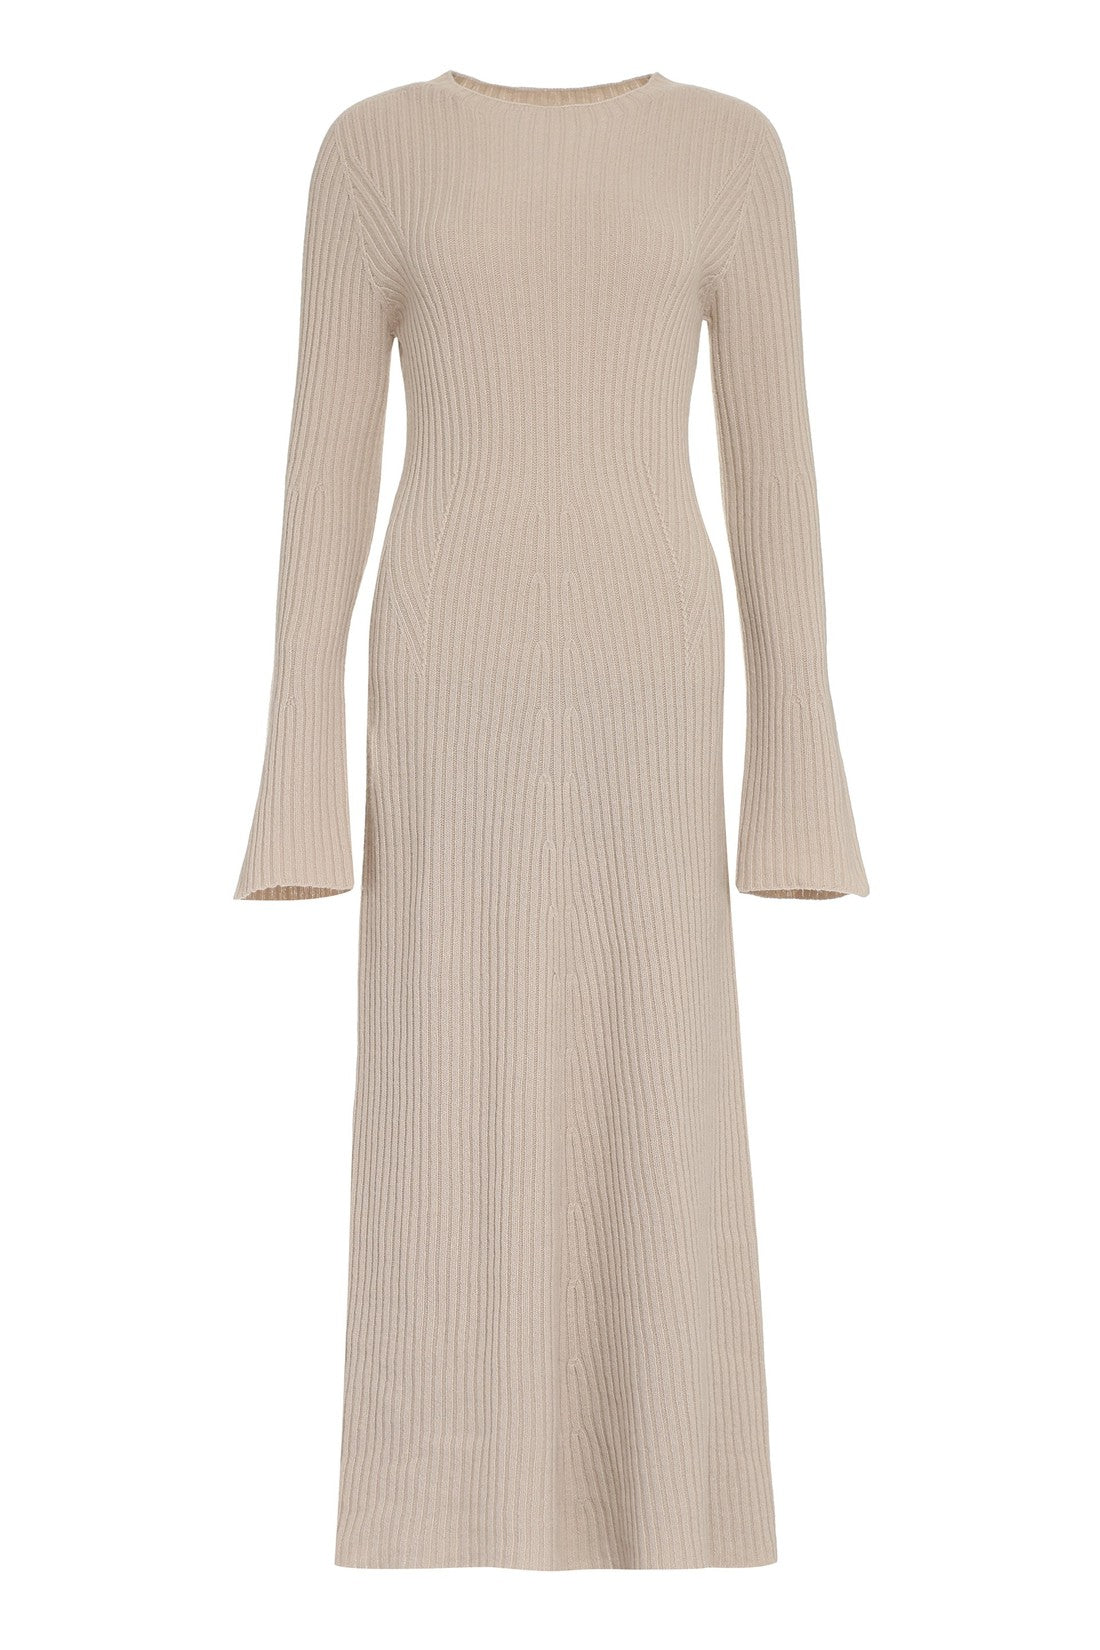 Roberto Collina-OUTLET-SALE-Knitted dress-ARCHIVIST